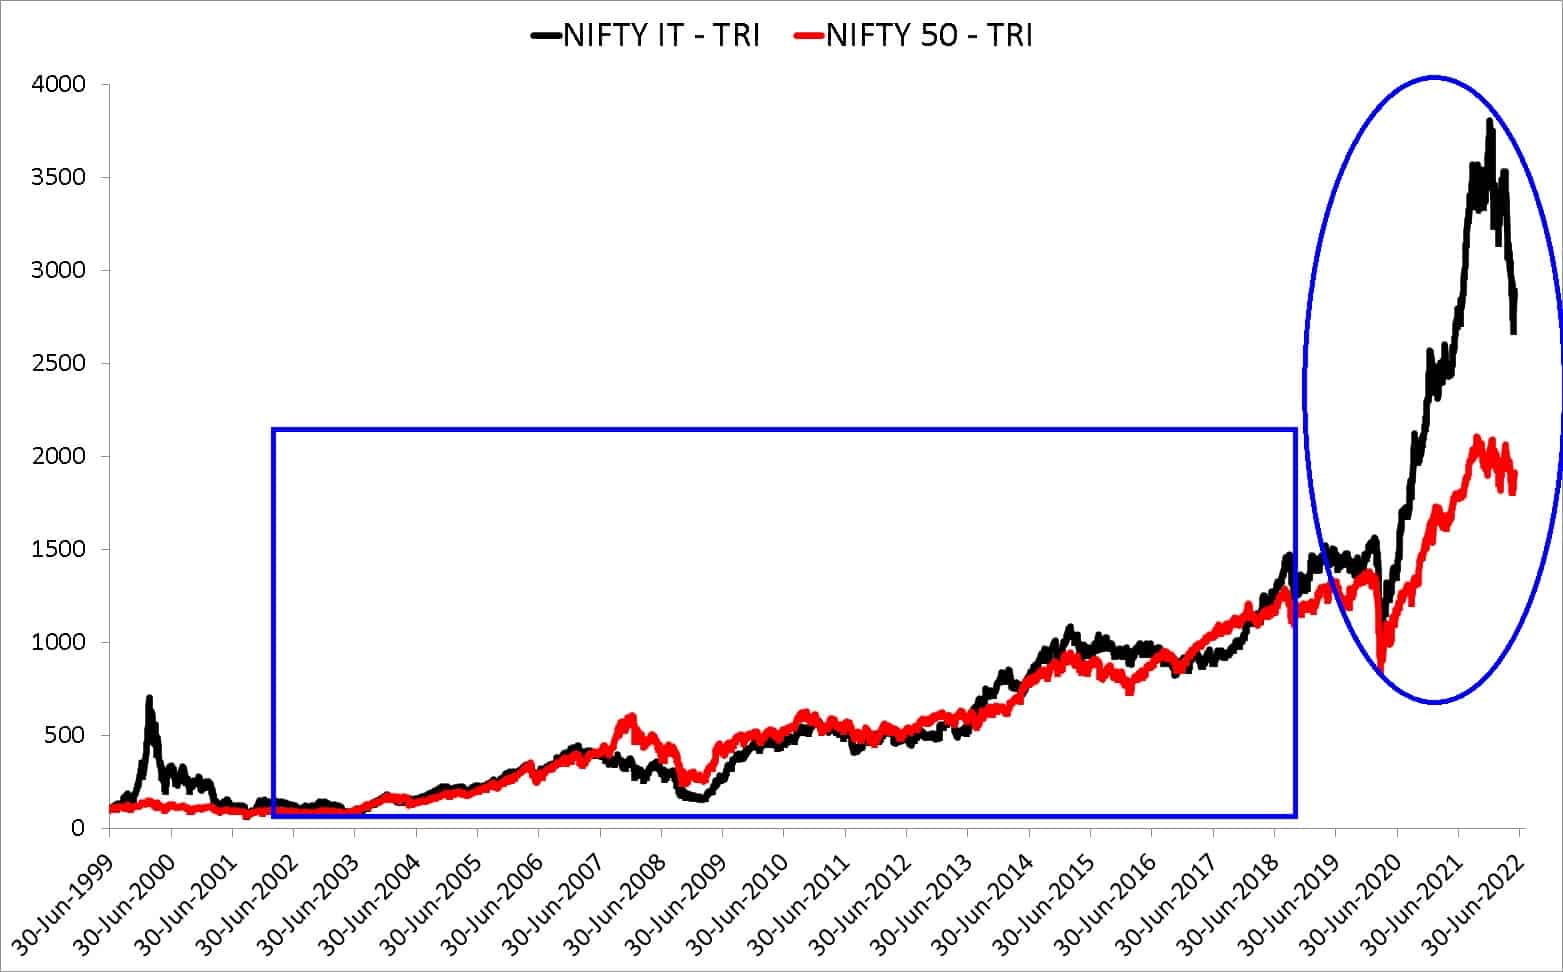 Nifty IT total returns index vs Nifty 50 total returns index